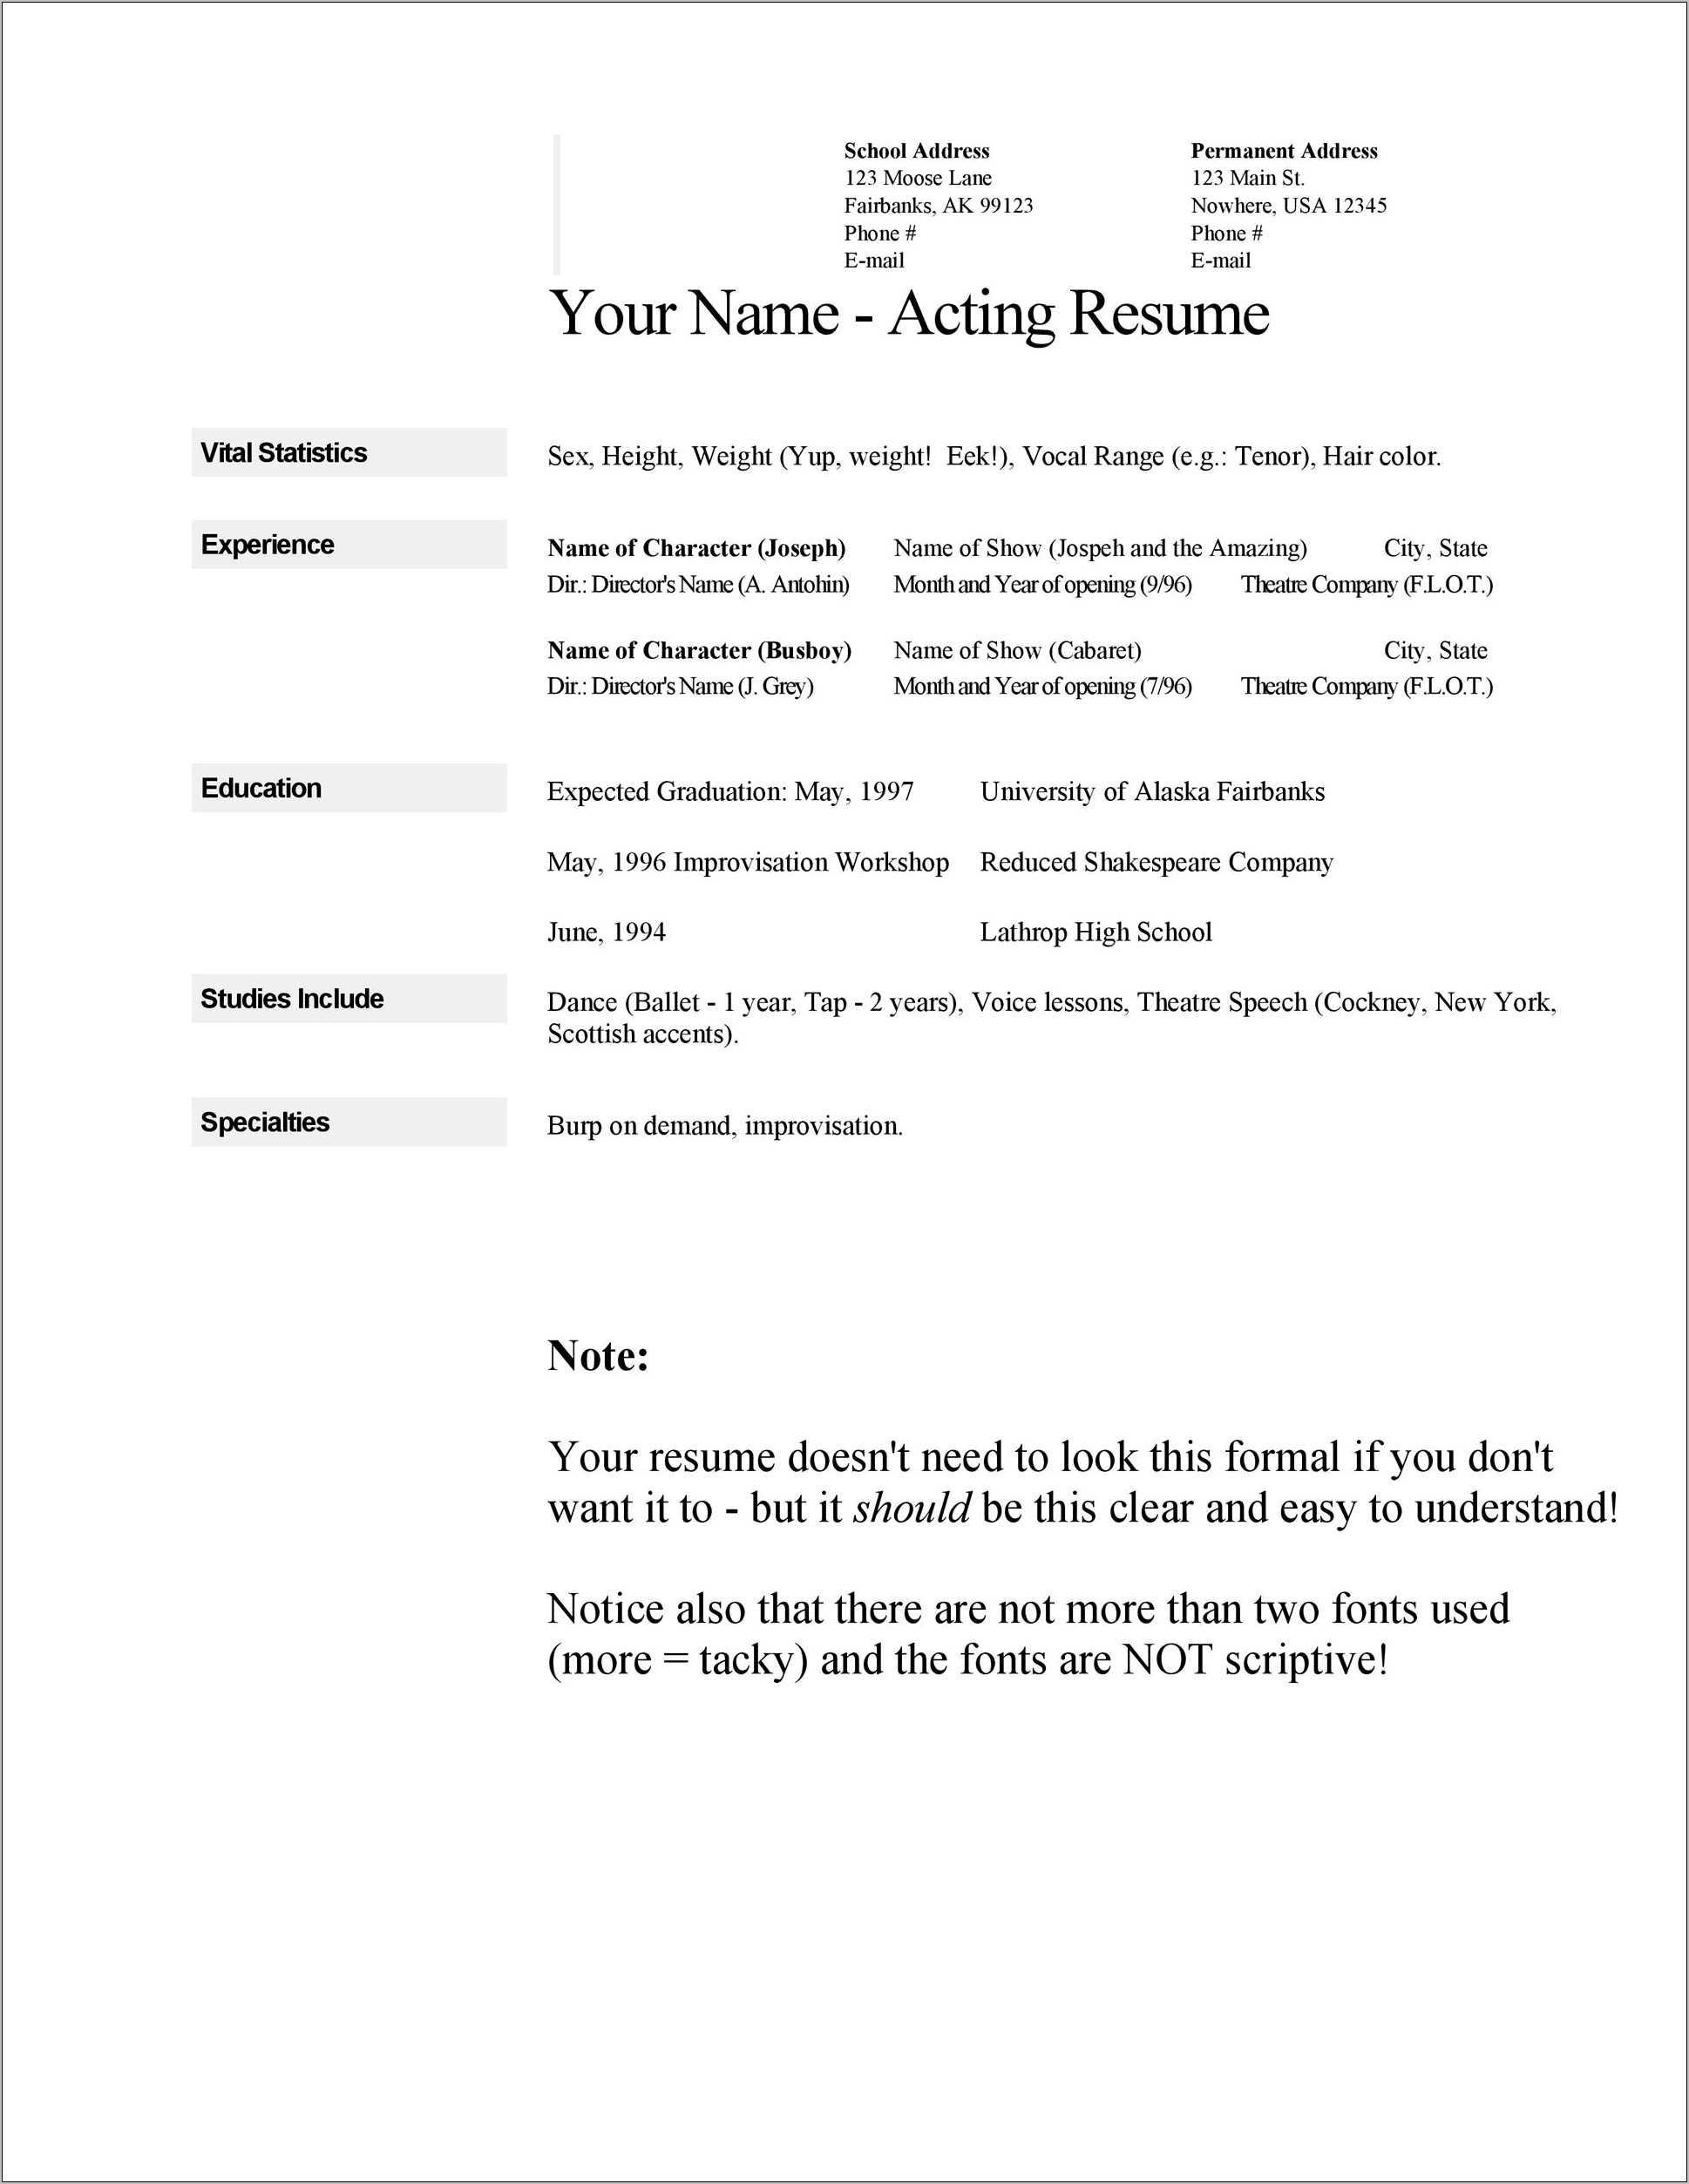 Can You Fake Theater Experience On Acting Resume